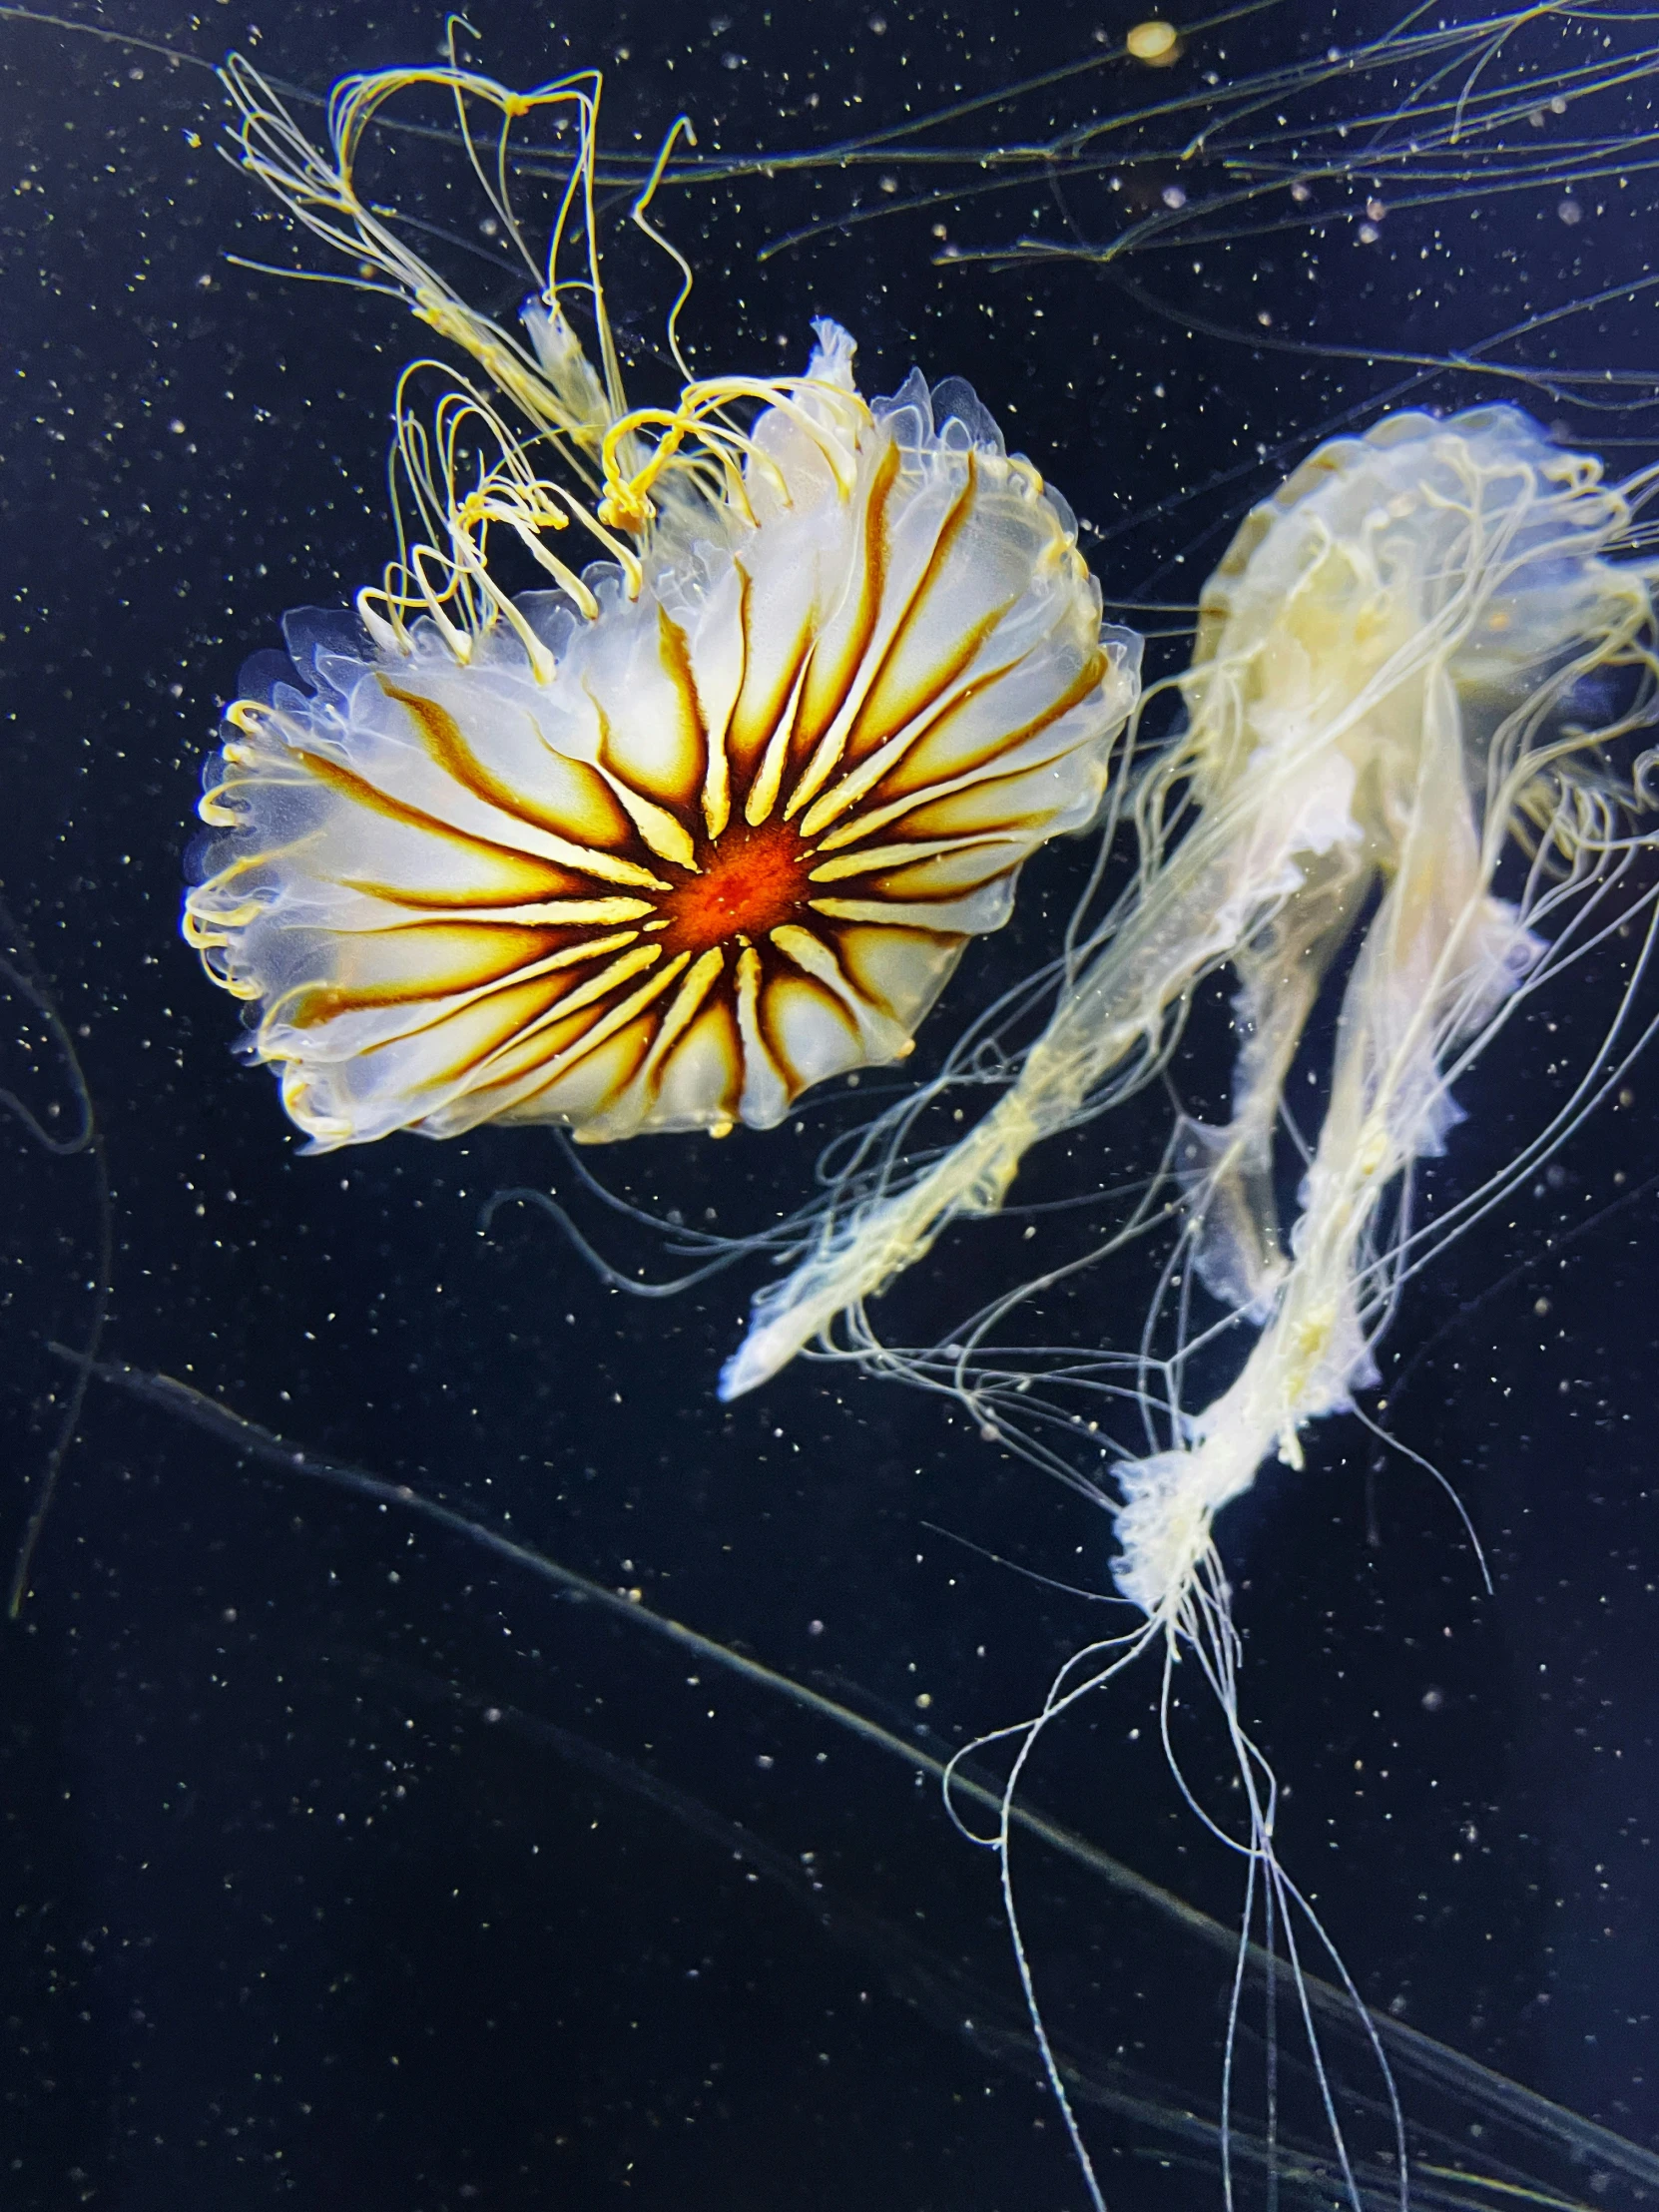 two jelly like animals floating in the water